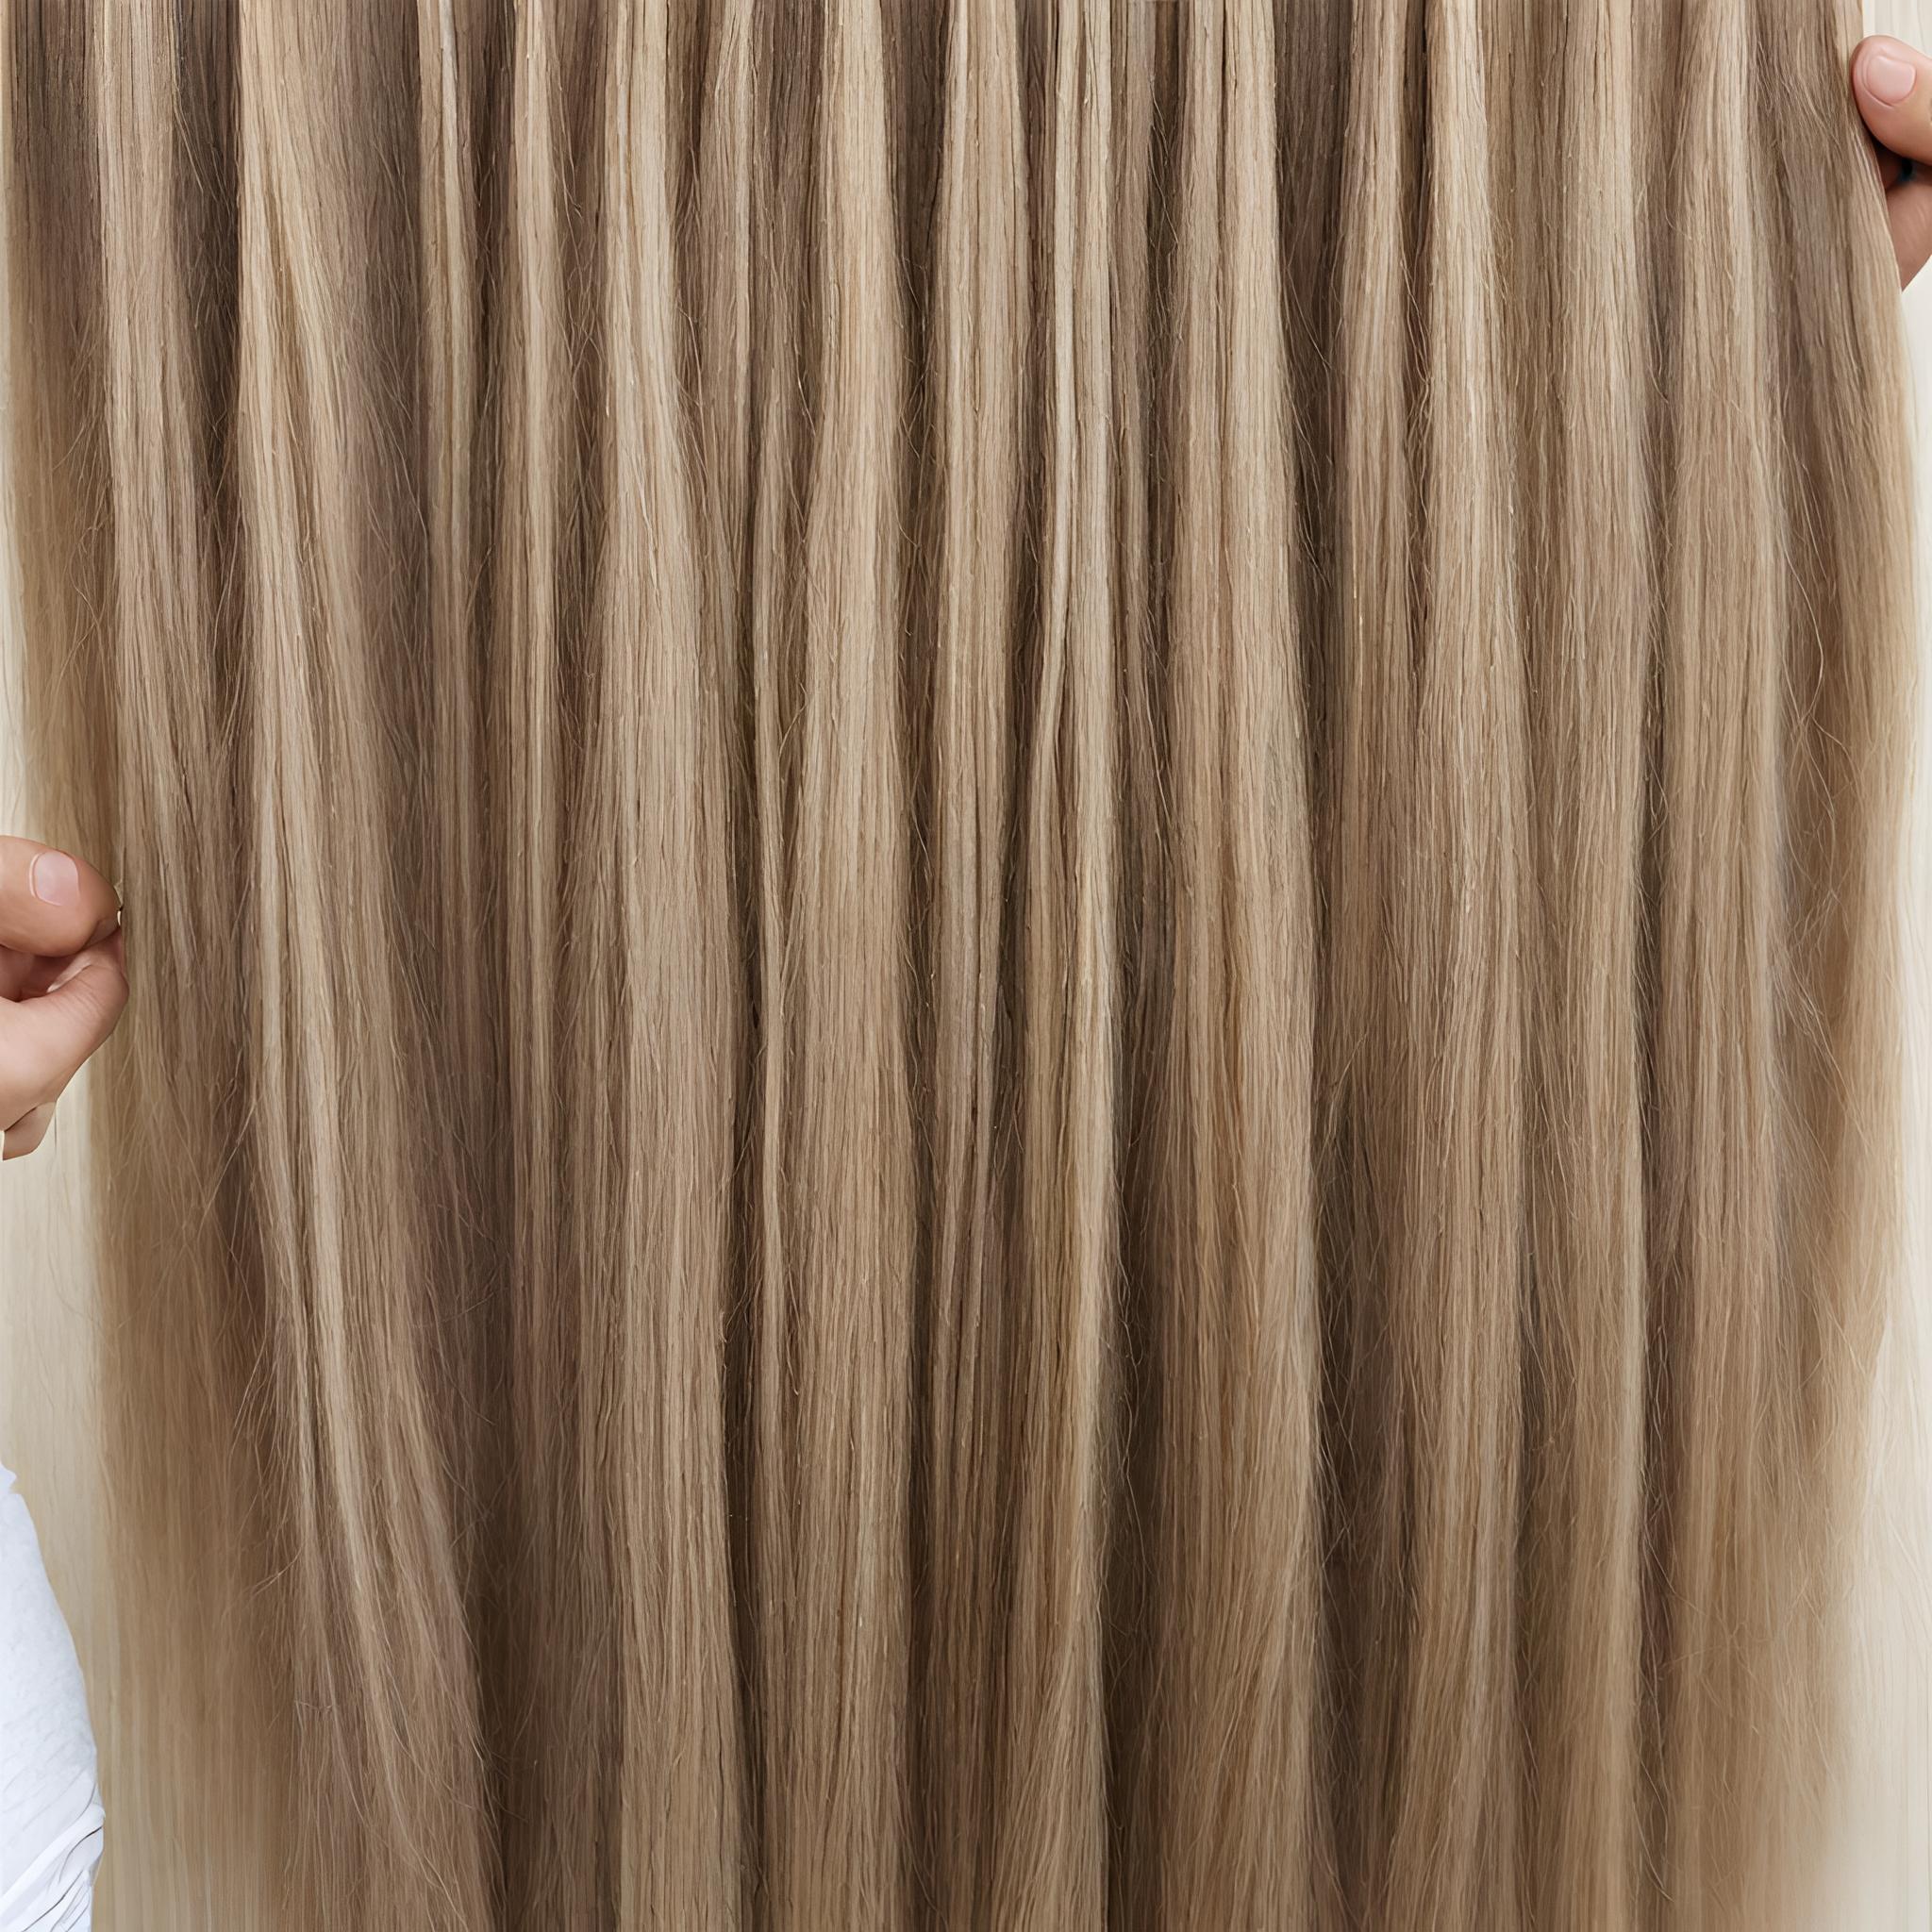 Remy Human Hair: The Ultimate Guide to Luxurious and Natural Looking Hair Extensions